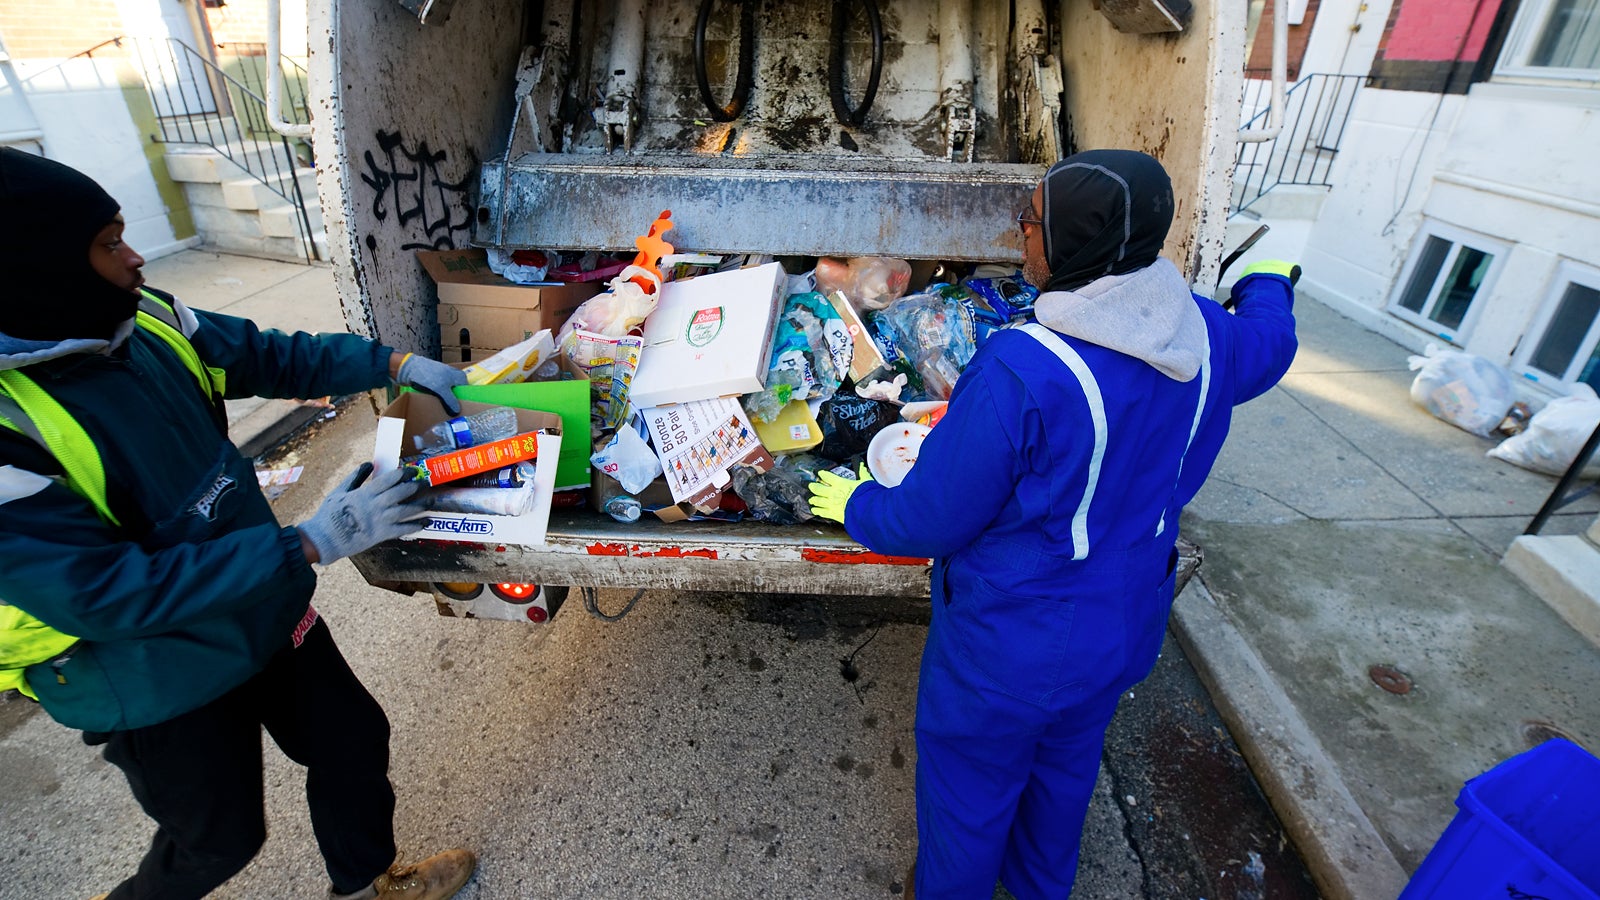 Recyclables collected by a Sanitation Division crew in Point Breeze on February 13th, 2017. (Bastiaan Slabbers for NewsWorks)